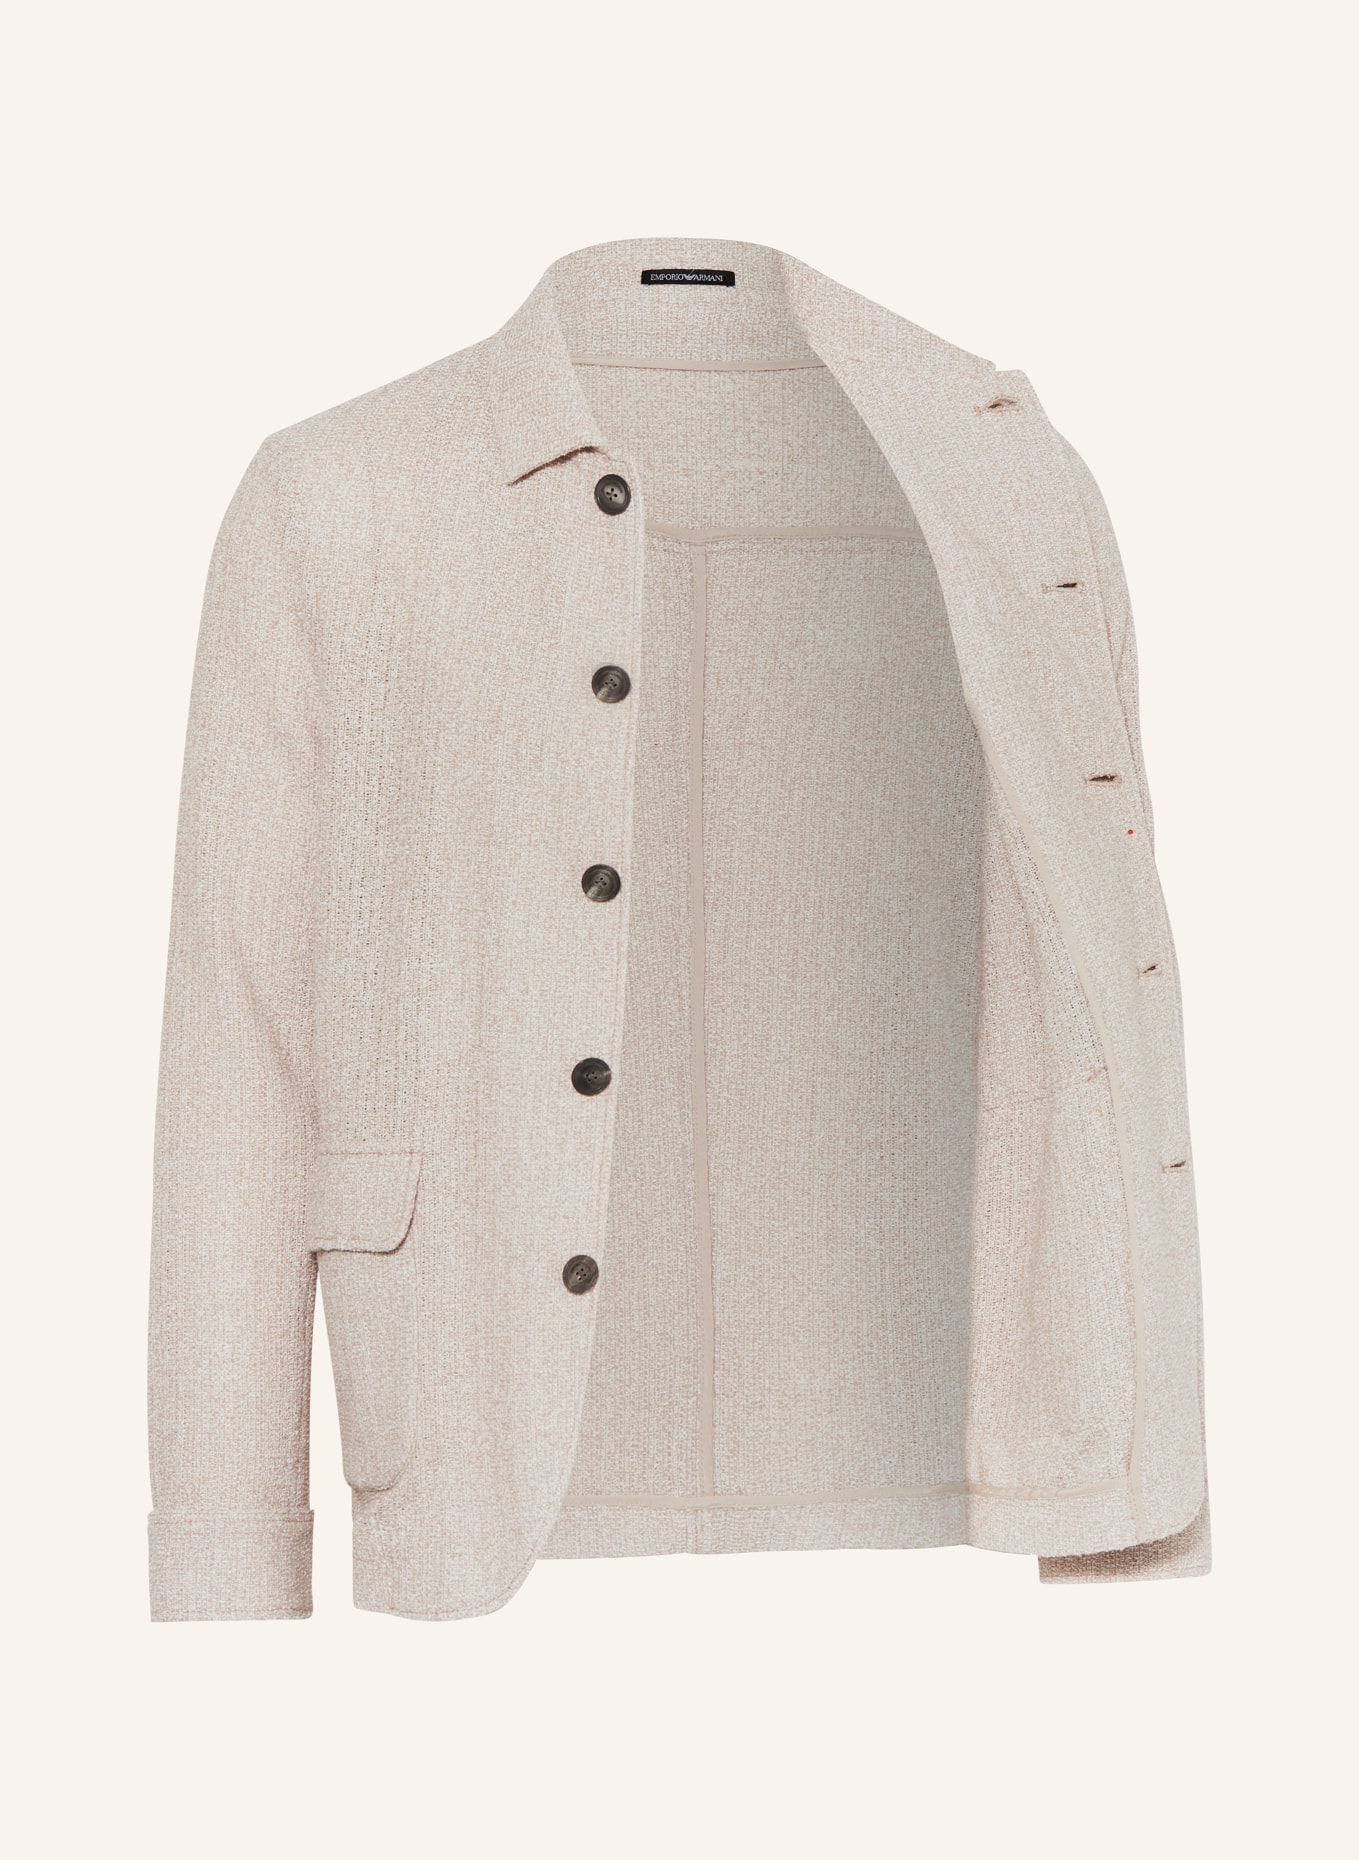 EMPORIO ARMANI Overshirt in knit fabric, Color: BEIGE (Image 4)